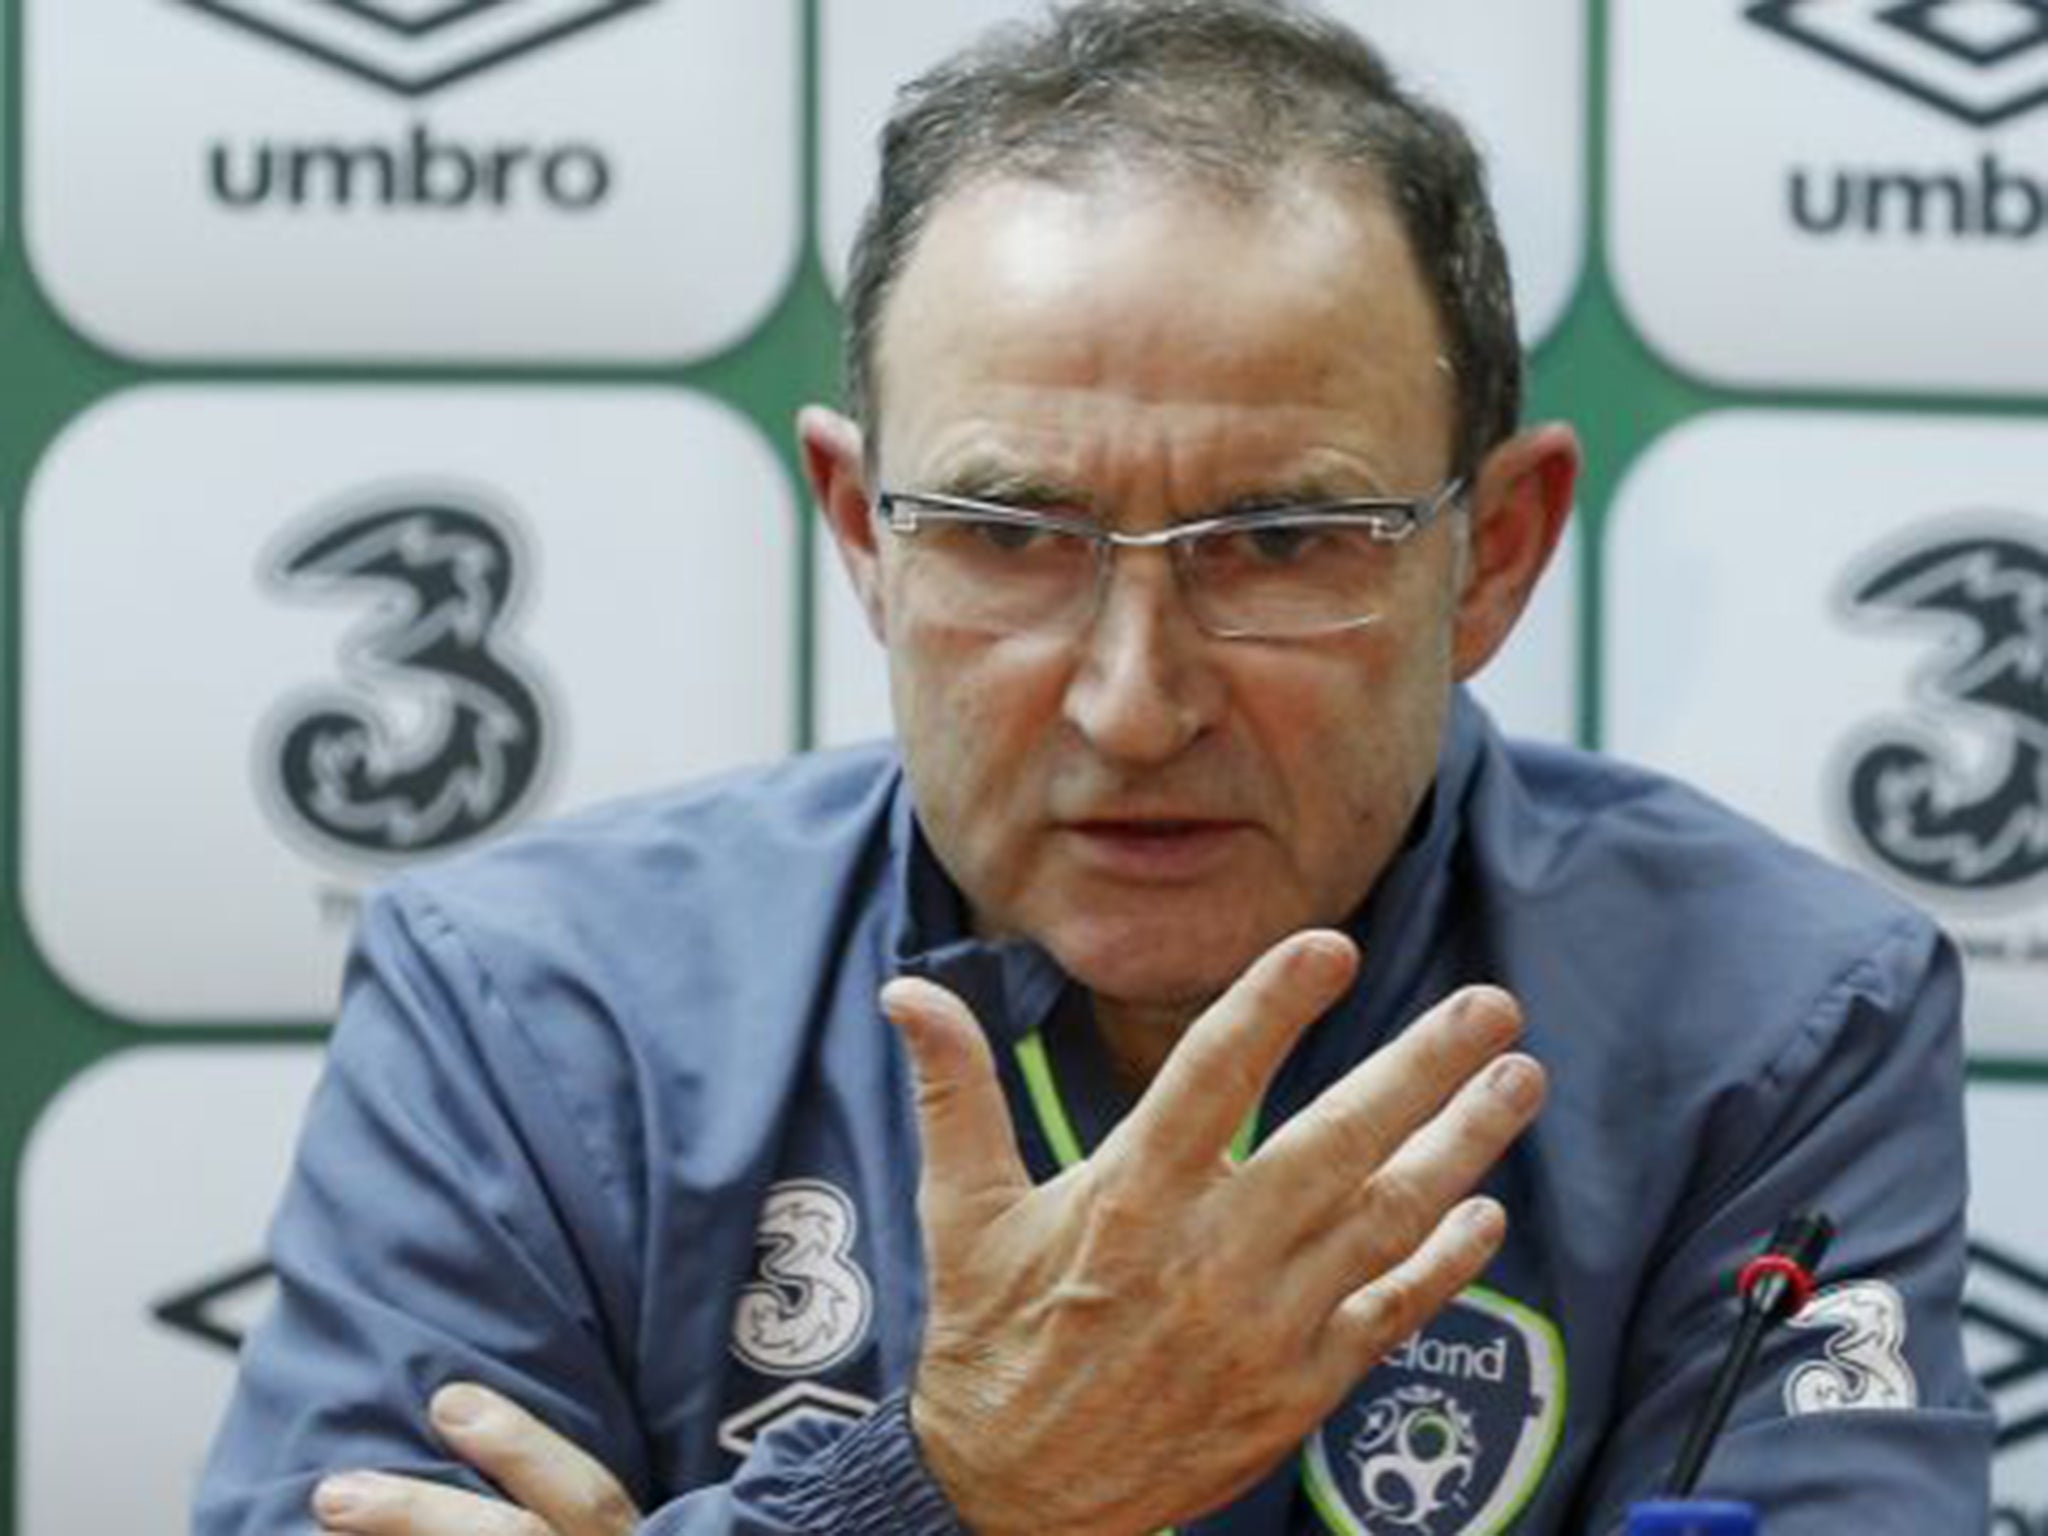 The Republic of Ireland manager, Martin O’Neill, deflected questions about picking Wes Hoolahan